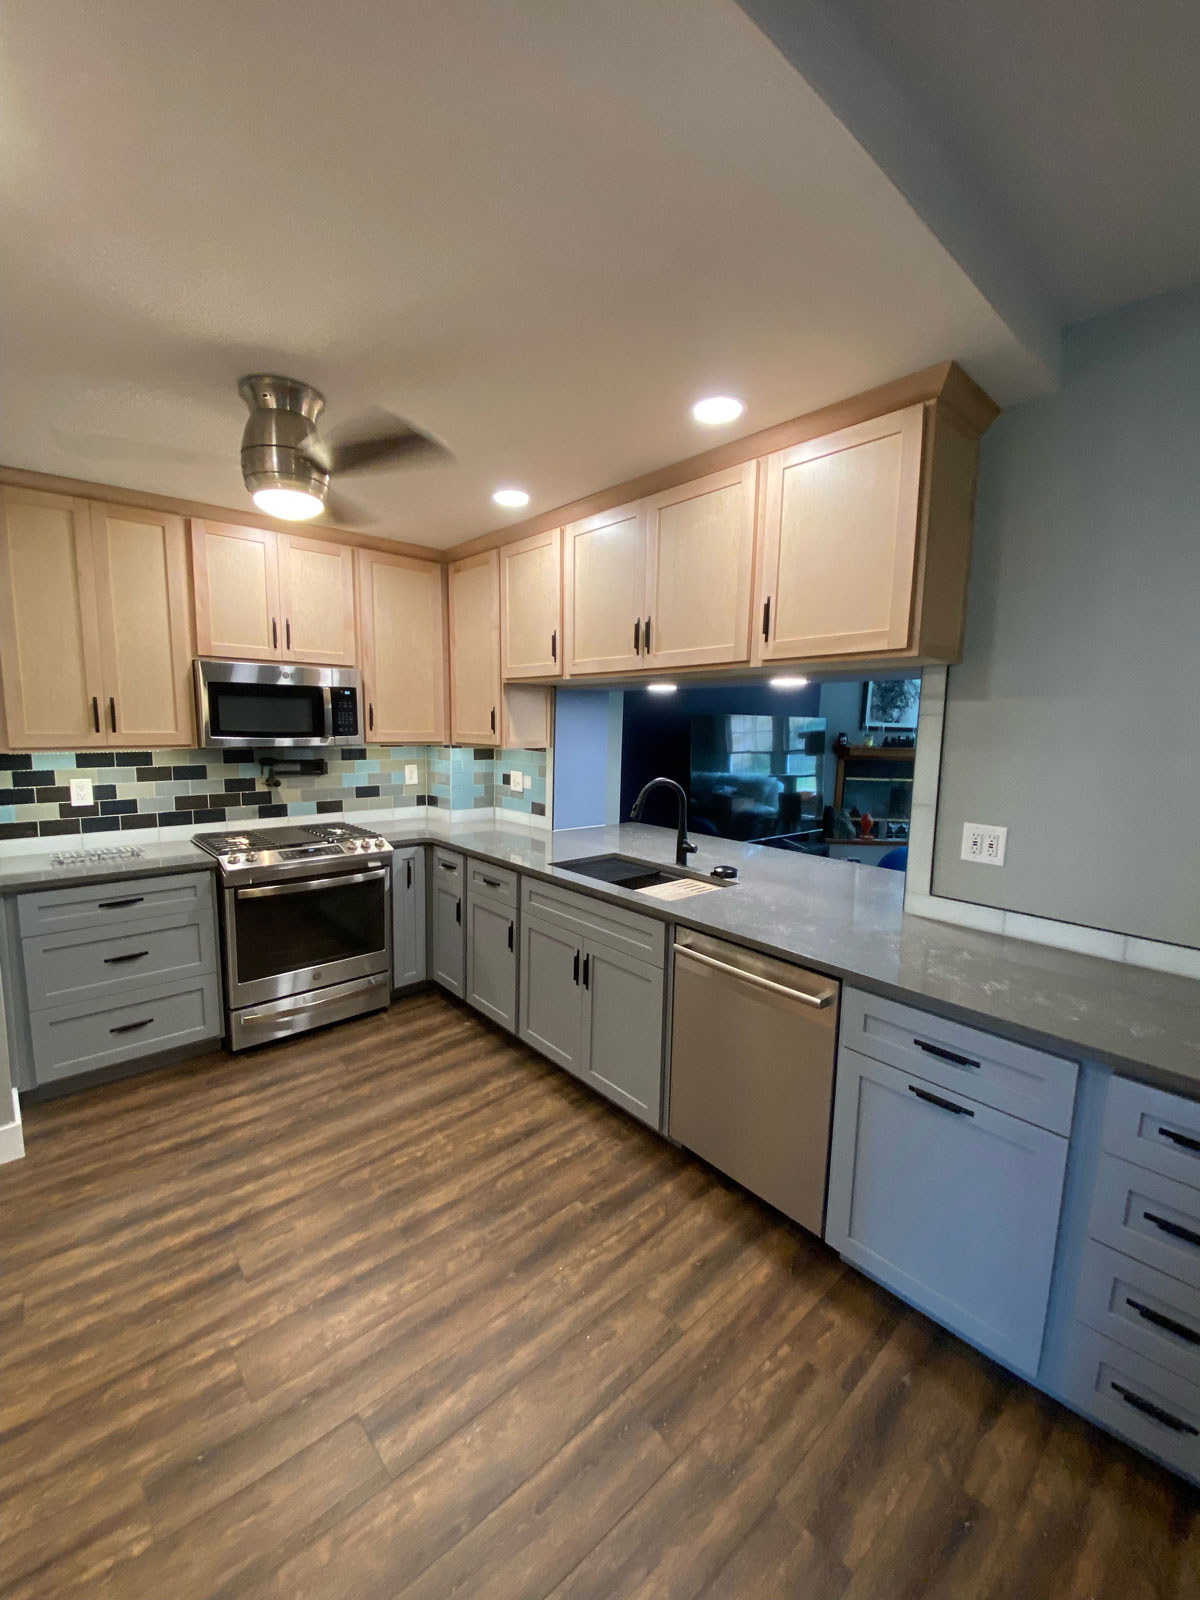 We offer kitchen cabinet design, installation, and fabrication services in Pennsylvania.